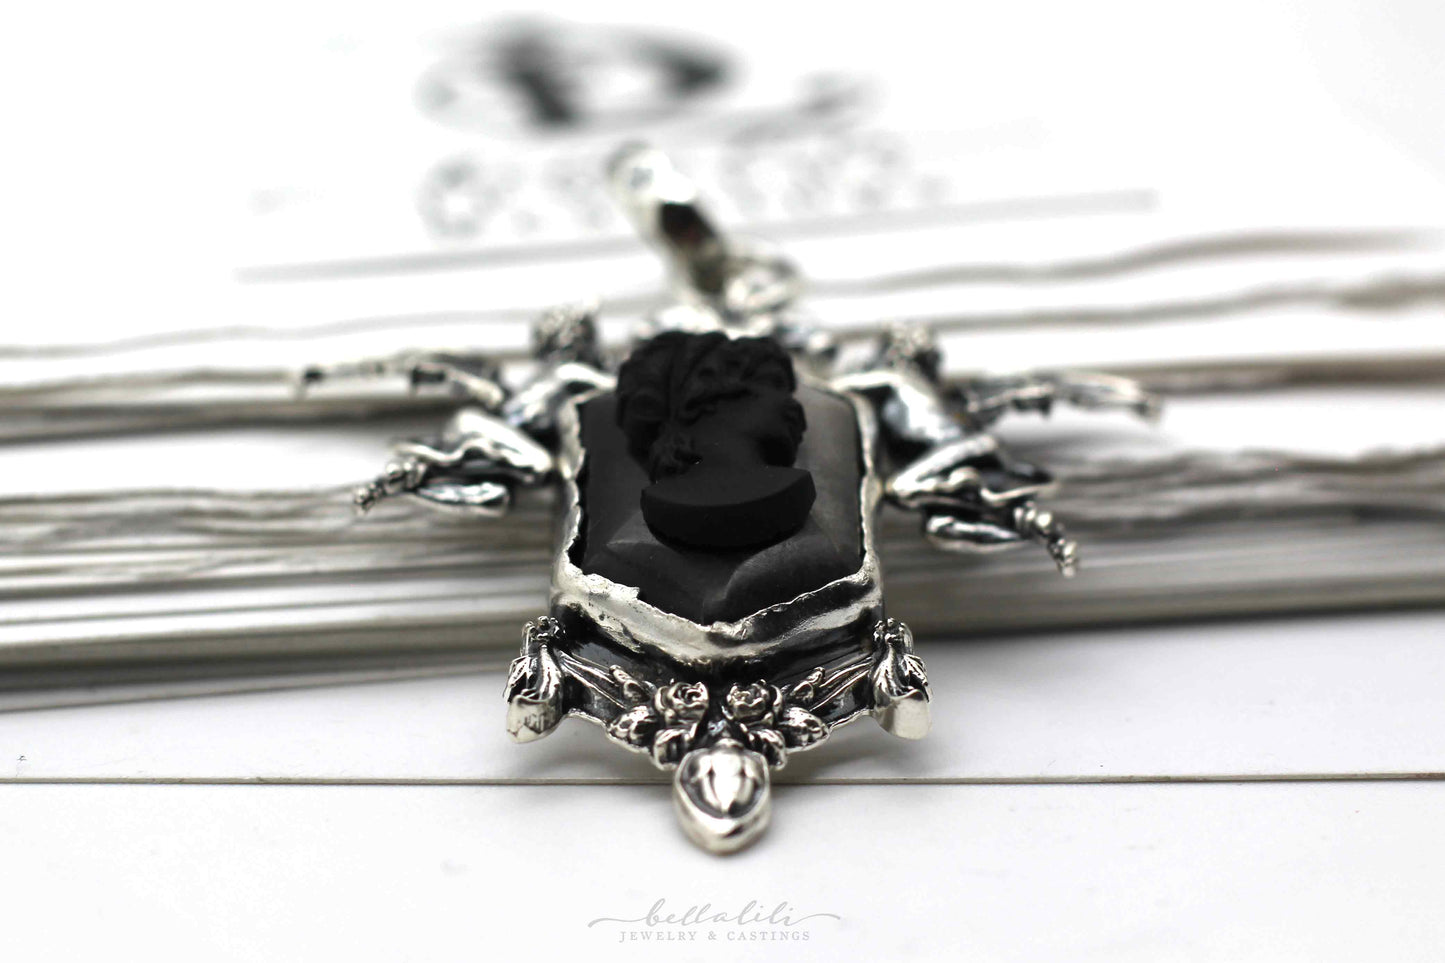 Femme Fatale, Morally Gray, Booktok inspired Sinner Necklace